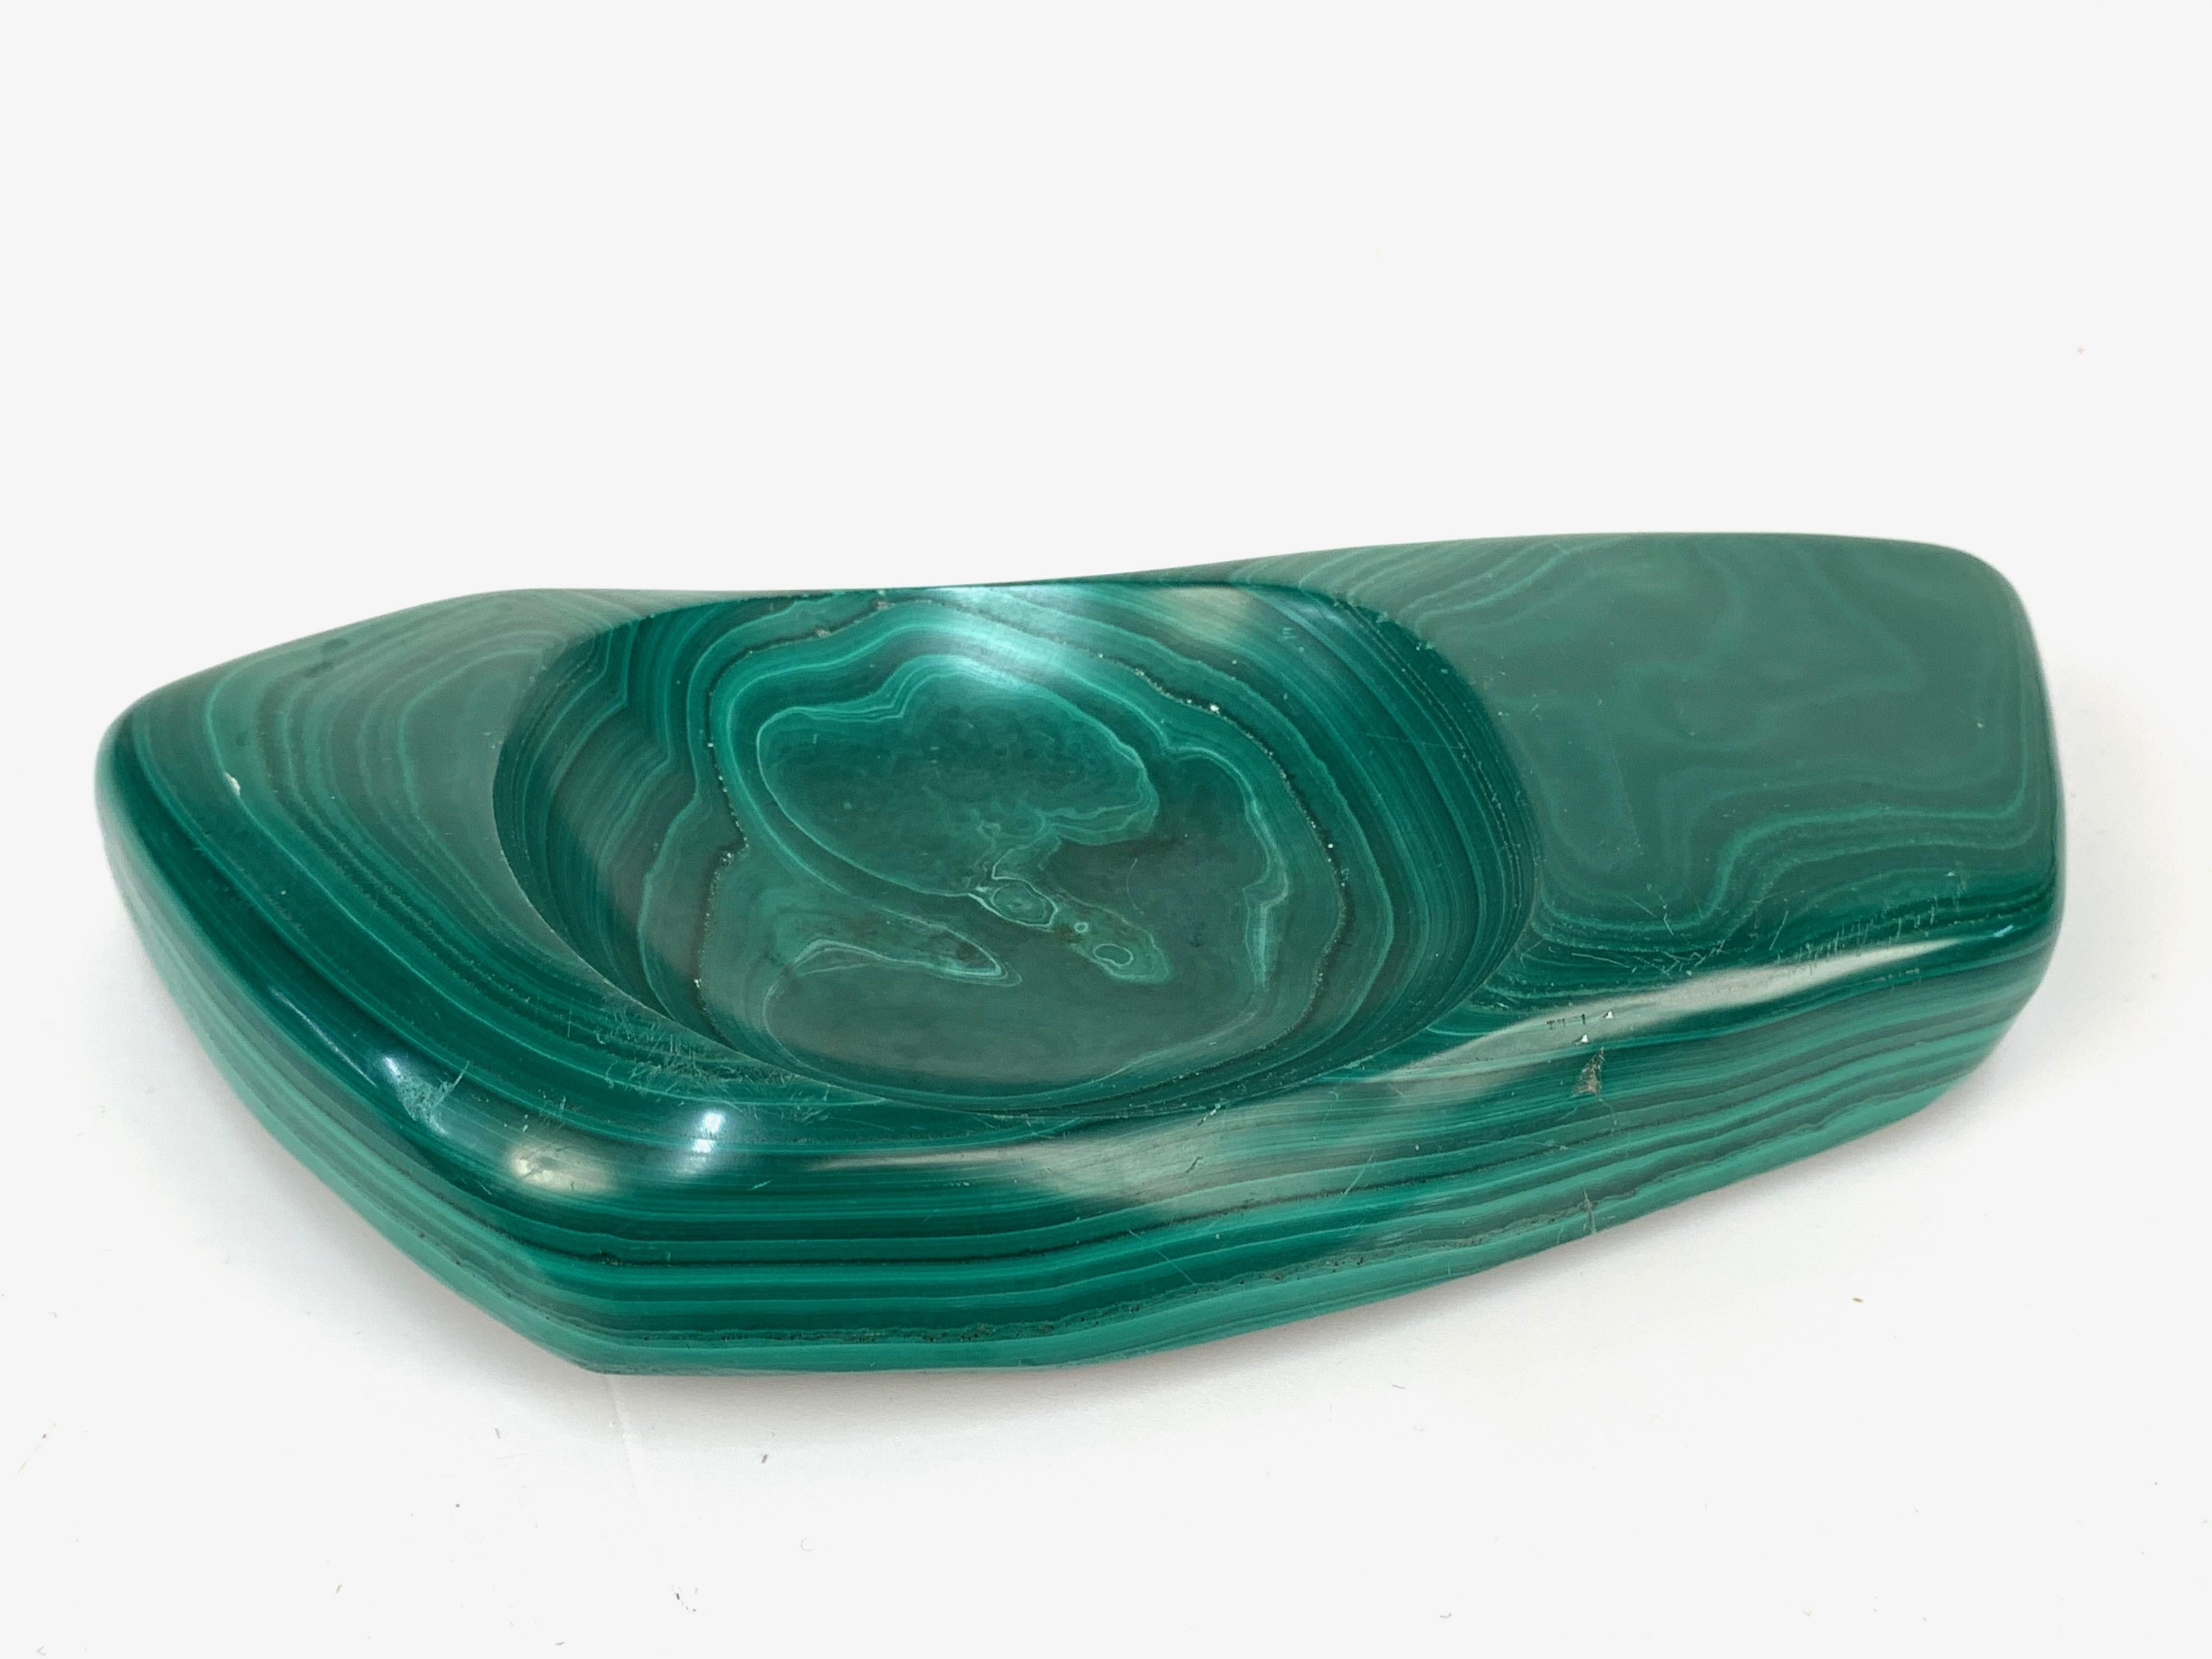 Elegant midcentury ashtray in green malachite marble.

The item is an Italian ashtray with an iconic midcentury design with an irregular shape and a round cigarette holder.

A wonderful ashtray that will enrich a midcentury project.